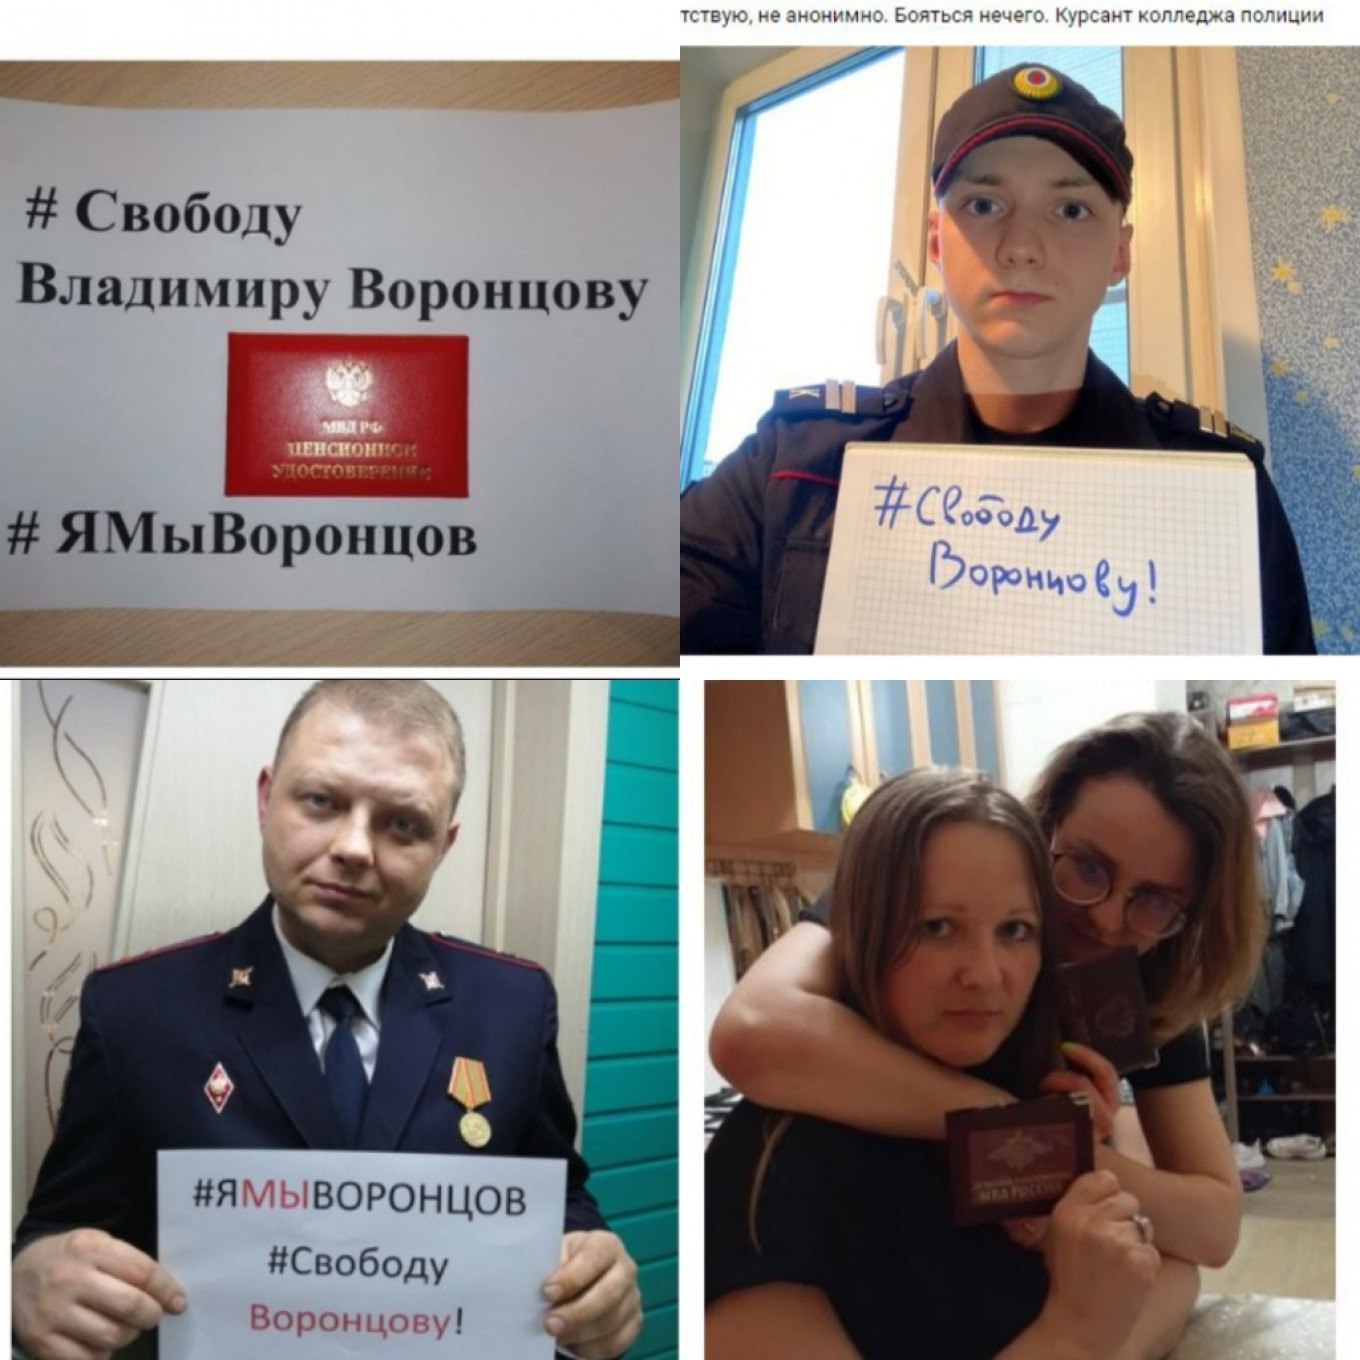 Officers Launch Flashmob to Demand Freedom for Russia’s ‘Police Ombudsman’